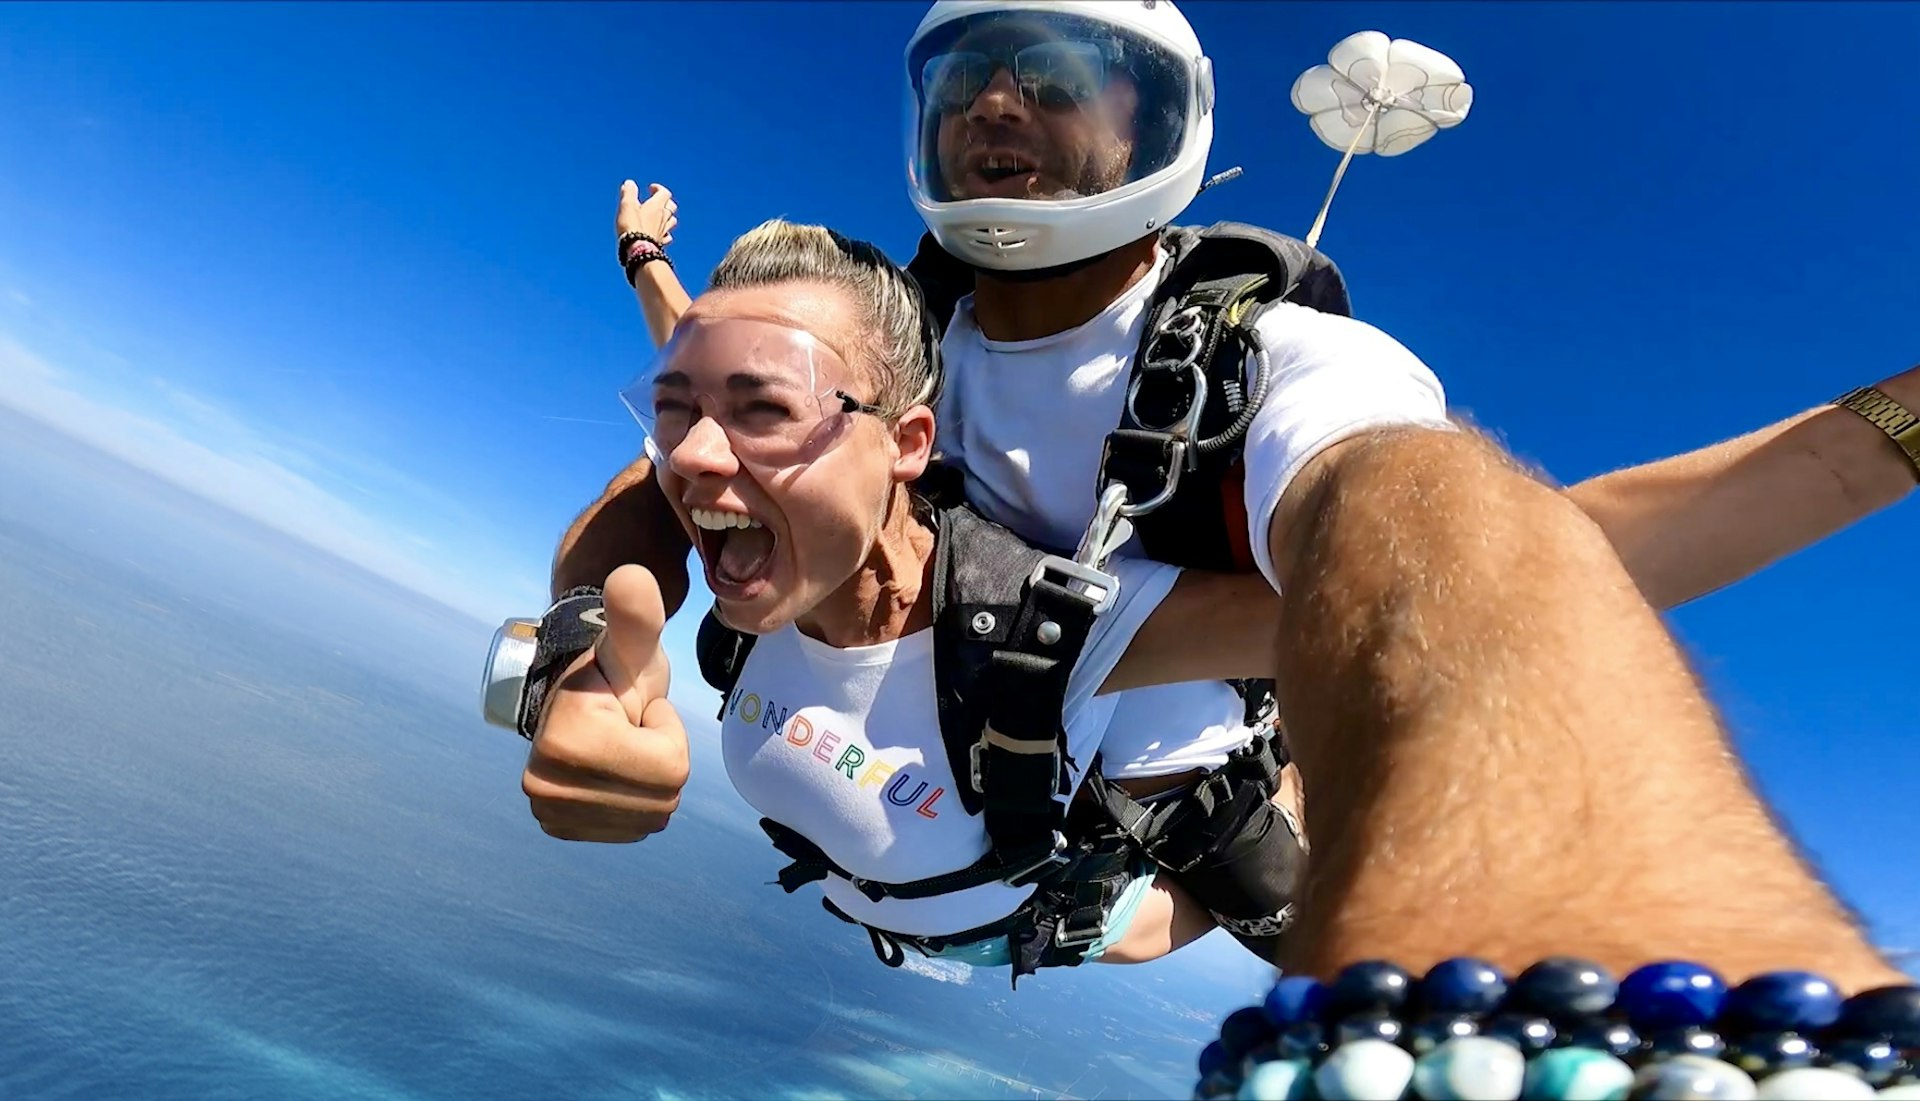 A woman gives the thumbs-up sign during a tandem skydive in the Maldives